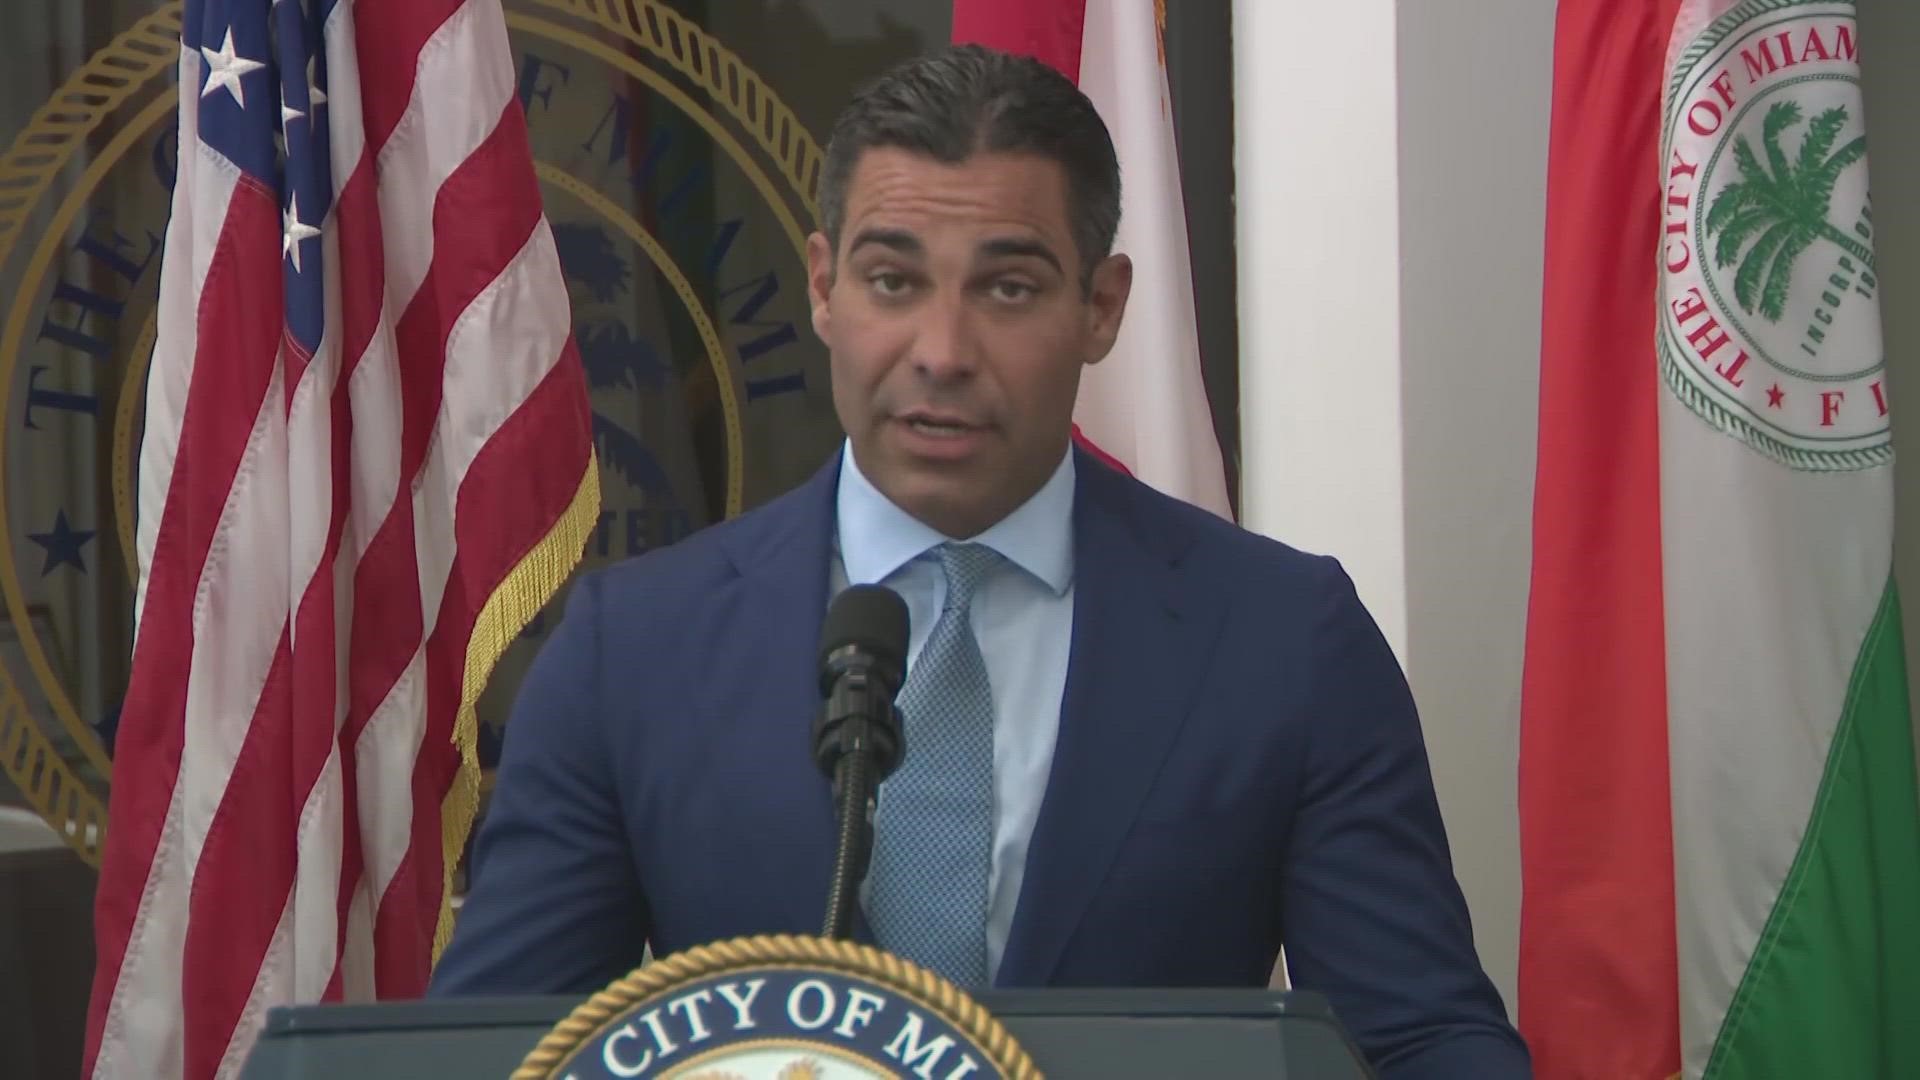 The Miami mayor addressed Chief Art Acevedo's suspension from the Miami Police Department. He said he supports the Miami city manager's experience.